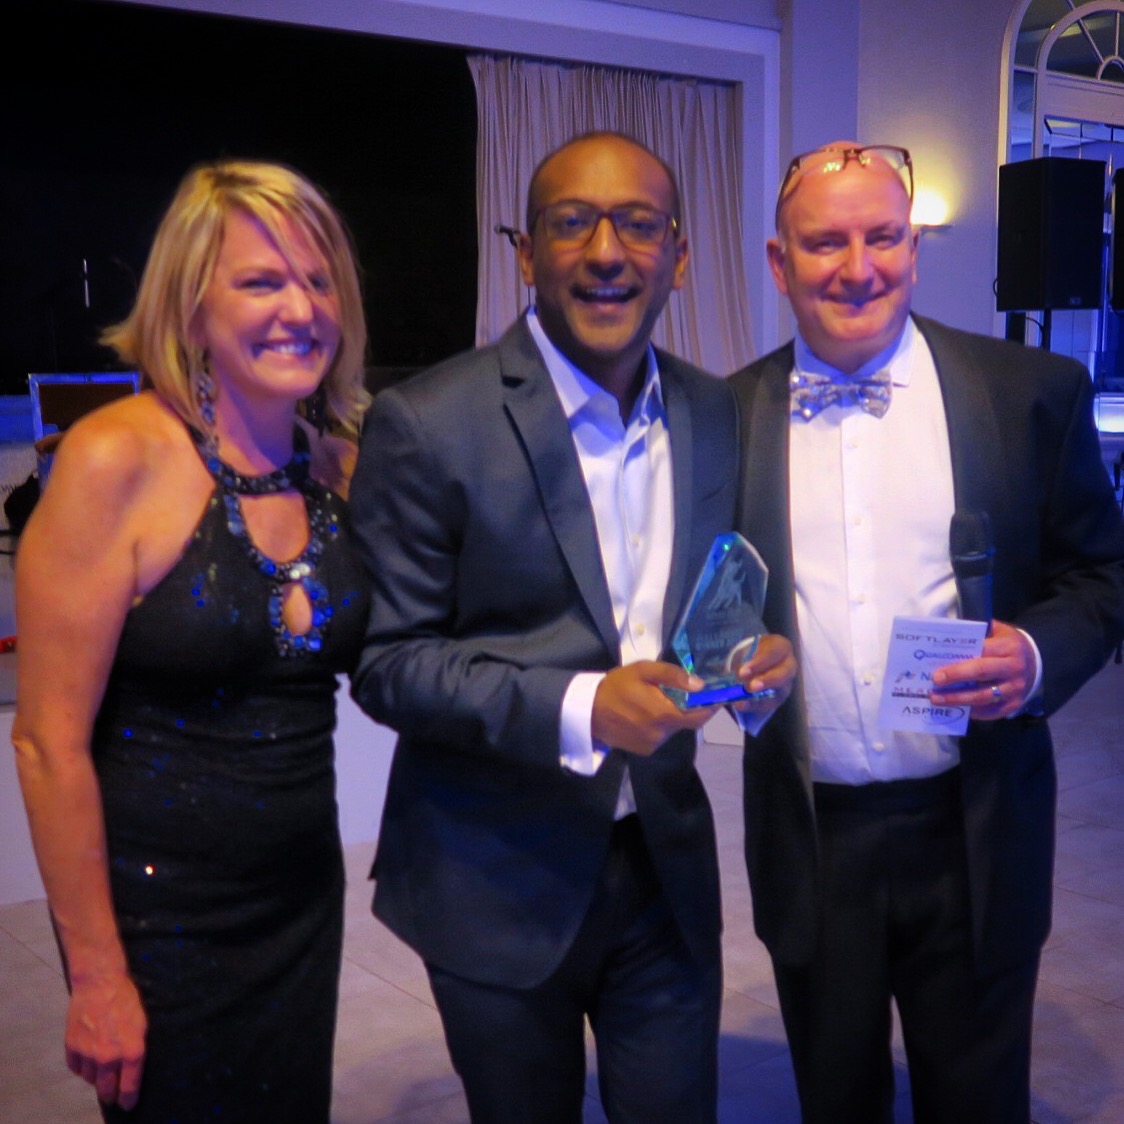 Skillbridge CTO & Co-Founder, Saalim Chowdhury with the Bully Award and White Bull Summit Chairs Elizabeth Perry and Farley Duvall